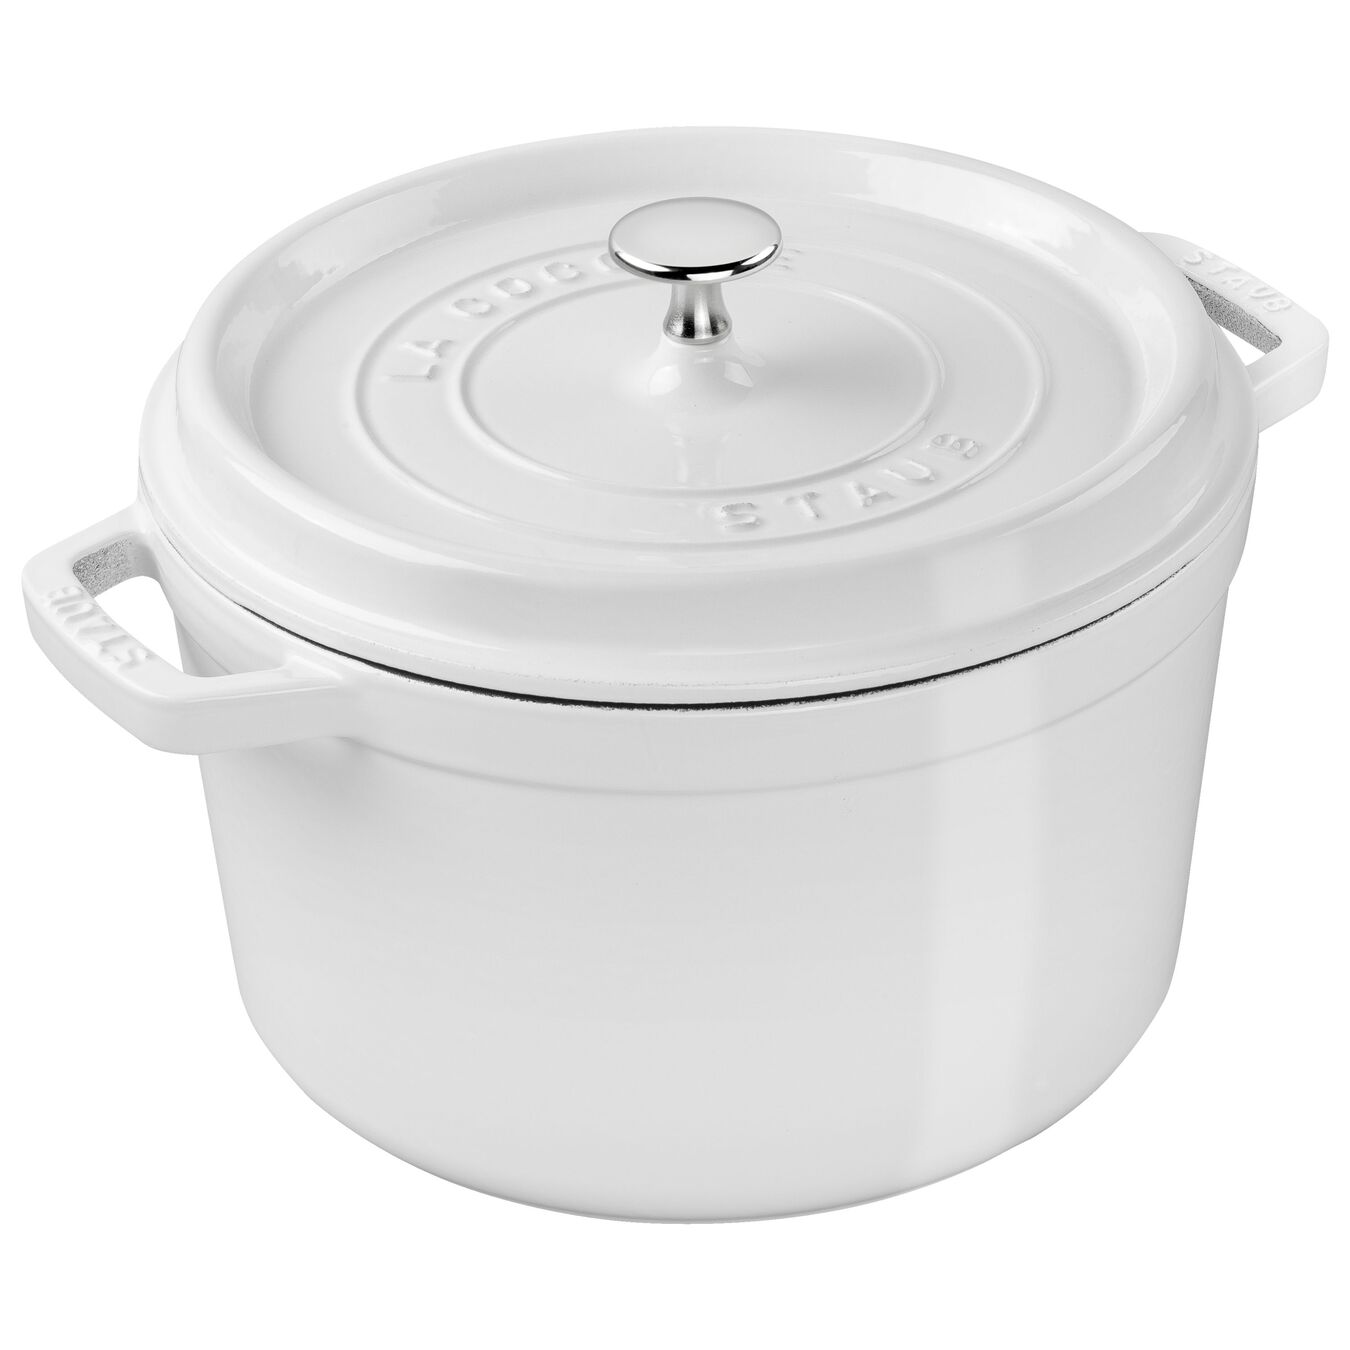 5 qt, round, Tall Cocotte, white,,large 2